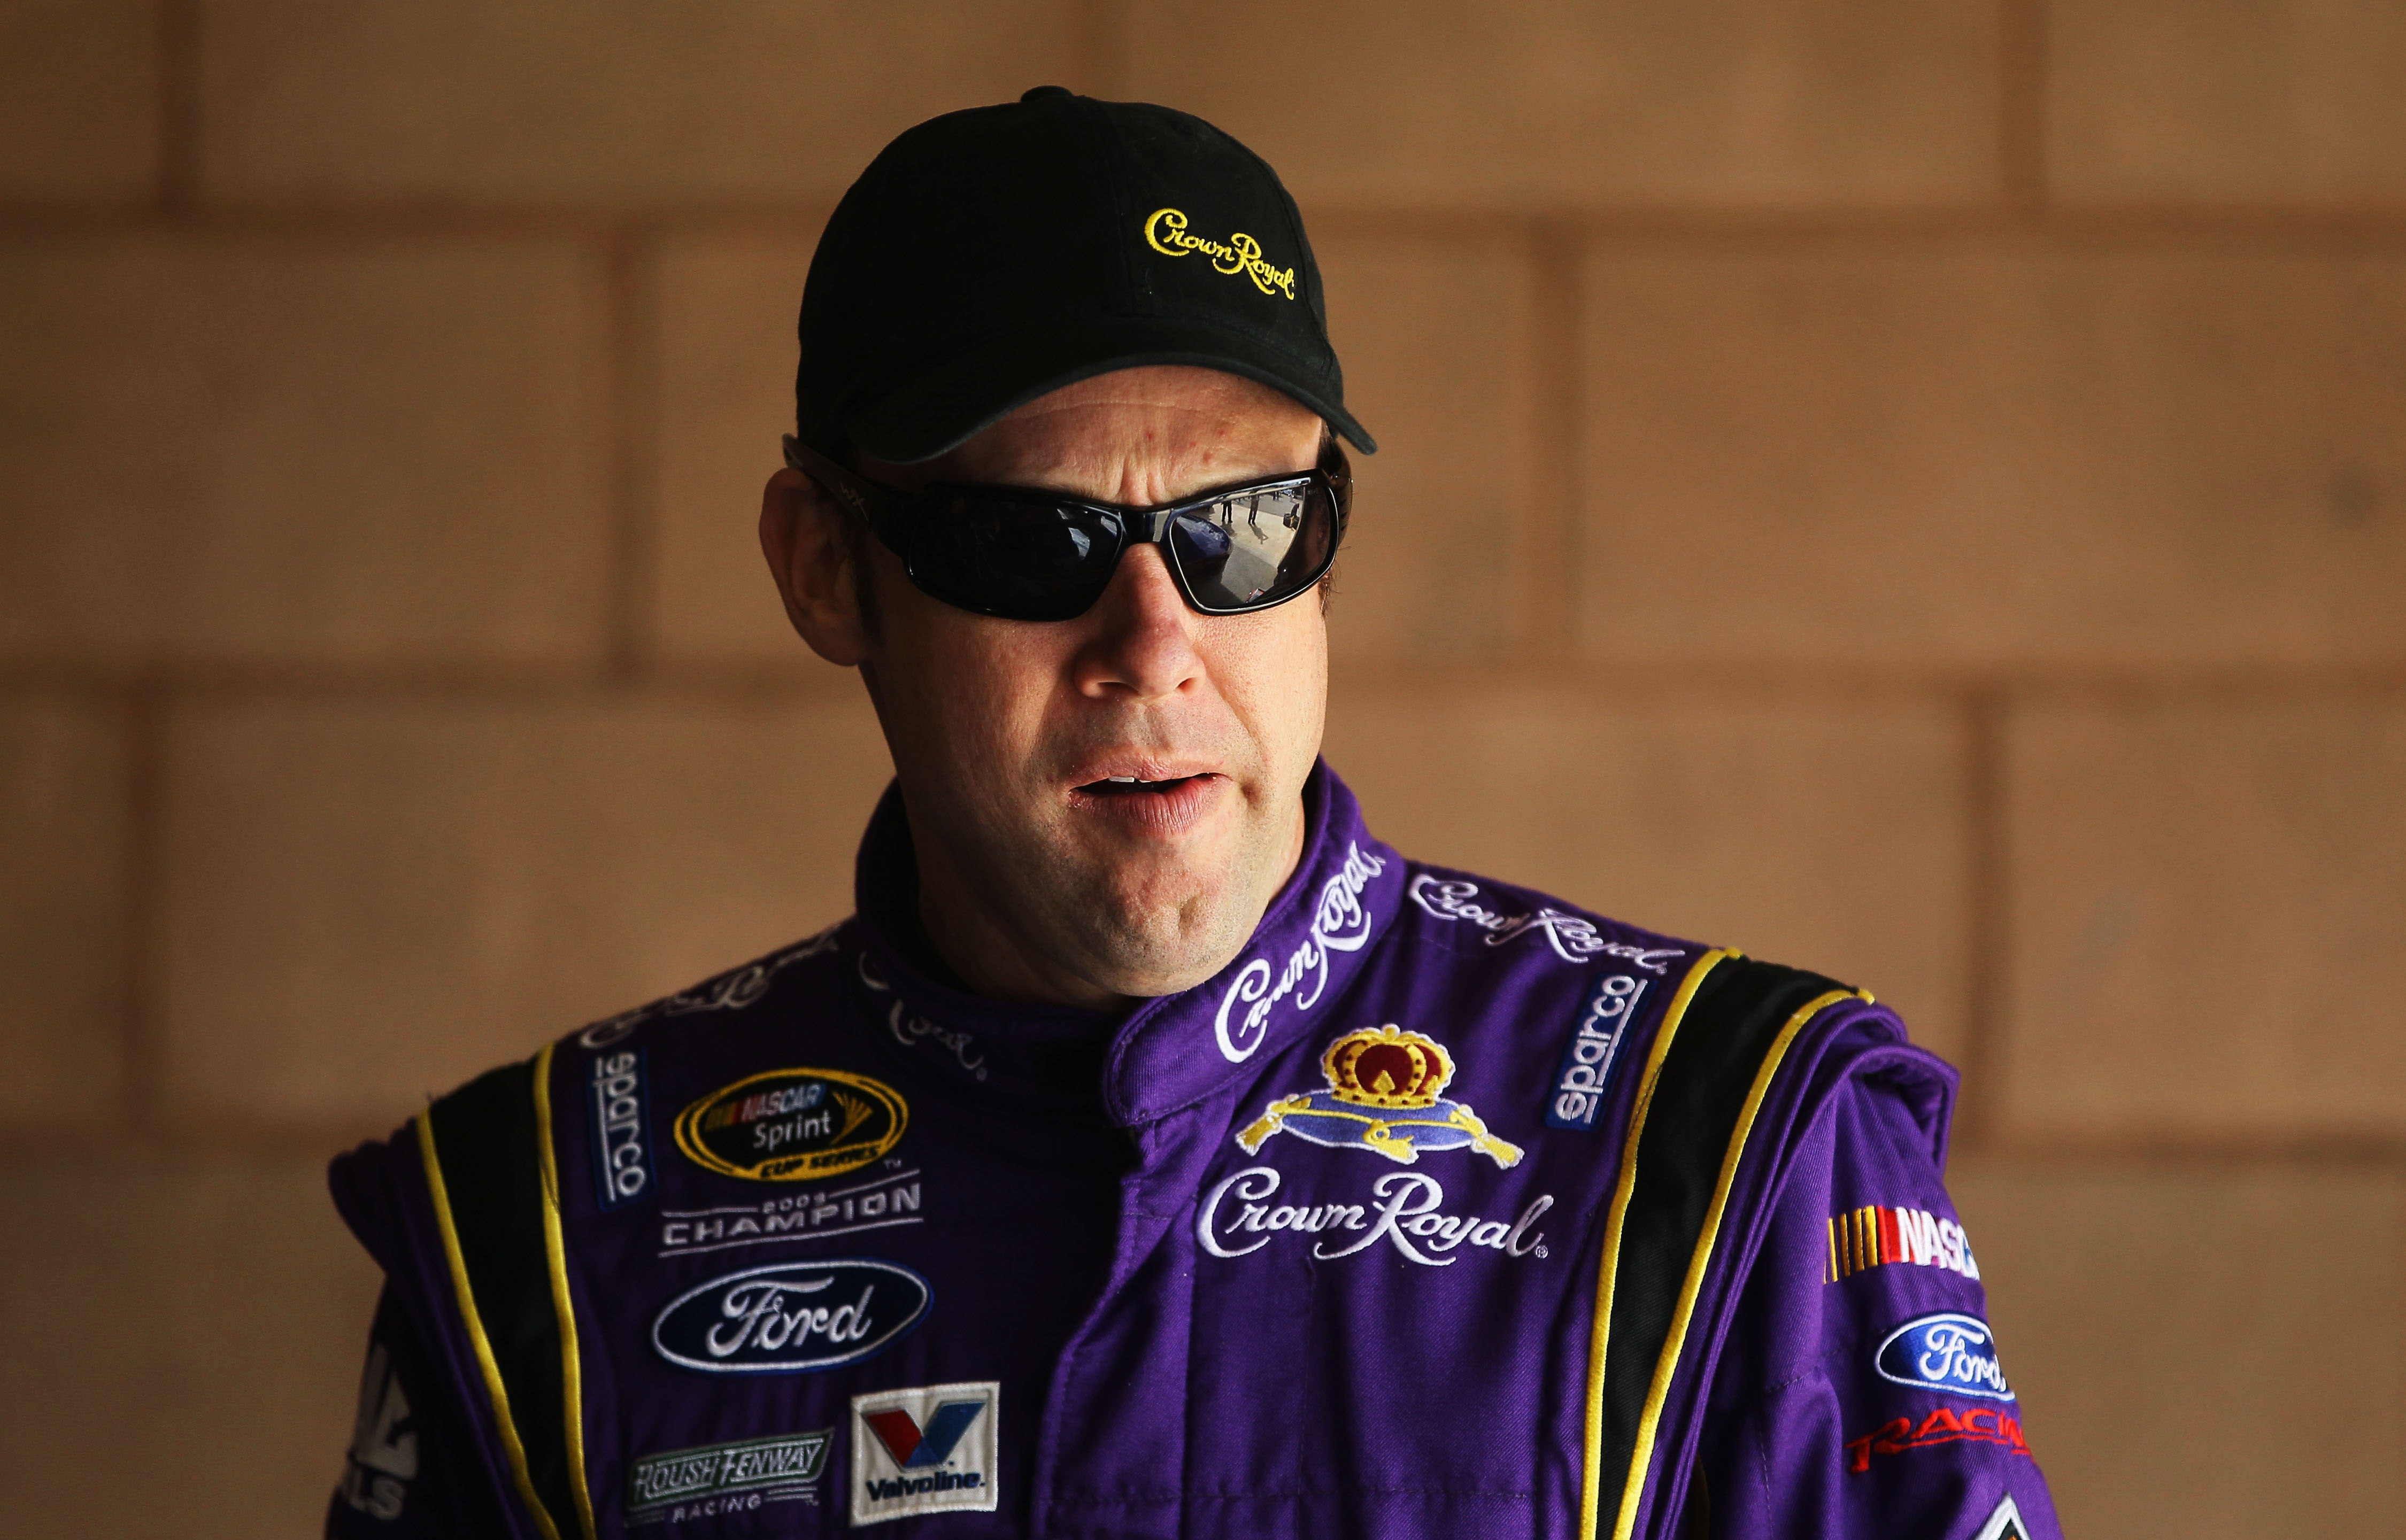 FONTANA, CA - MARCH 26:  Matt Kenseth, driver of the #17 Crown Royal Ford, stands in the garage area during practice for the NASCAR Sprint Cup Series Auto Club 400 at Auto Club Speedway on March 26, 2011 in Fontana, California.  (Photo by Jeff Gross/Getty